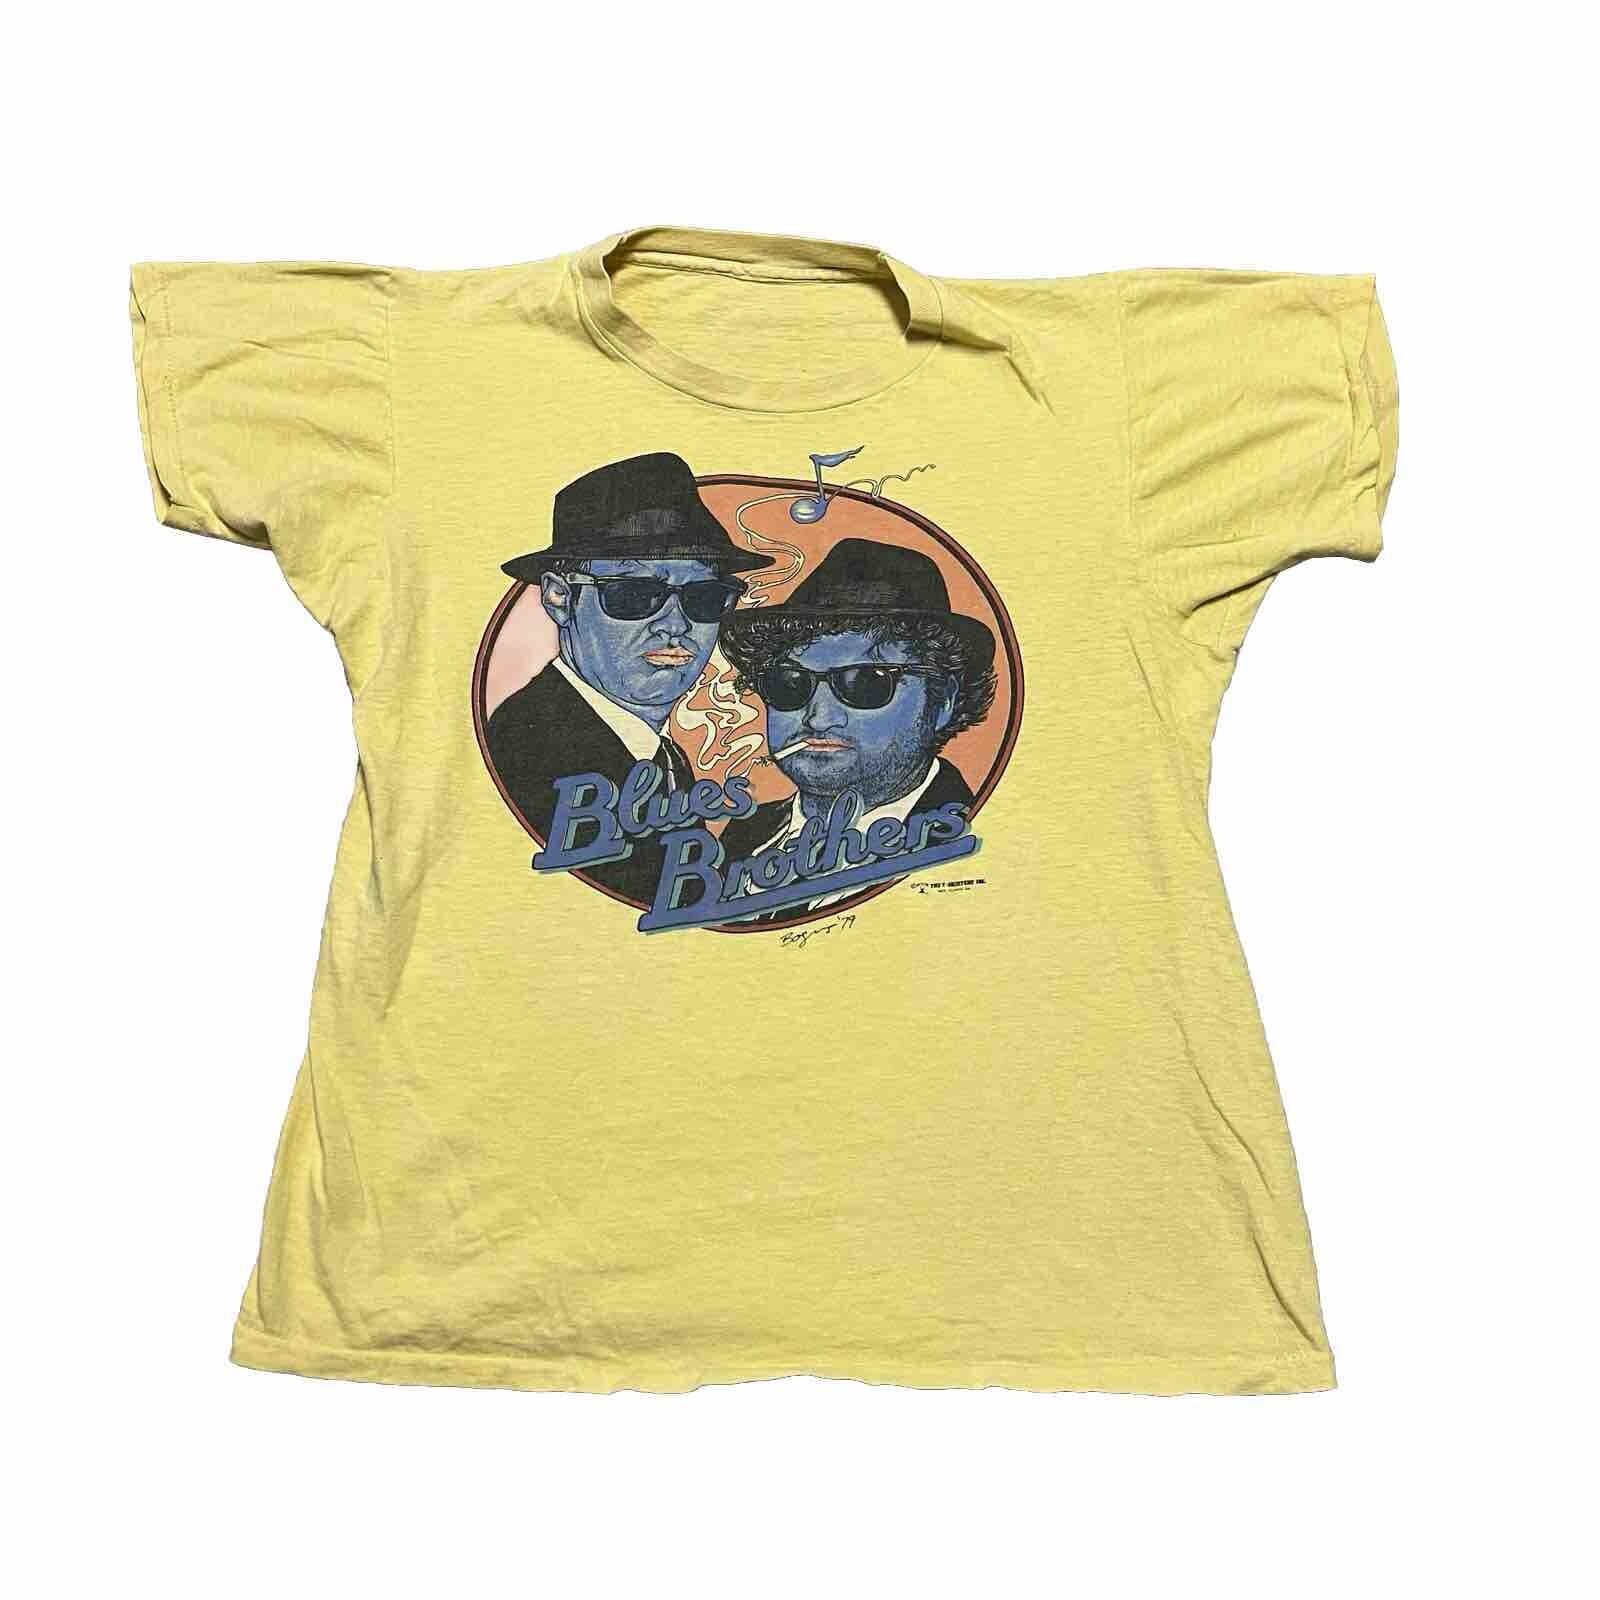 RARE Vintage 1979 Men\'s Yellow/Multicolor \'Blues Brothers\' T-Shirt - Size S